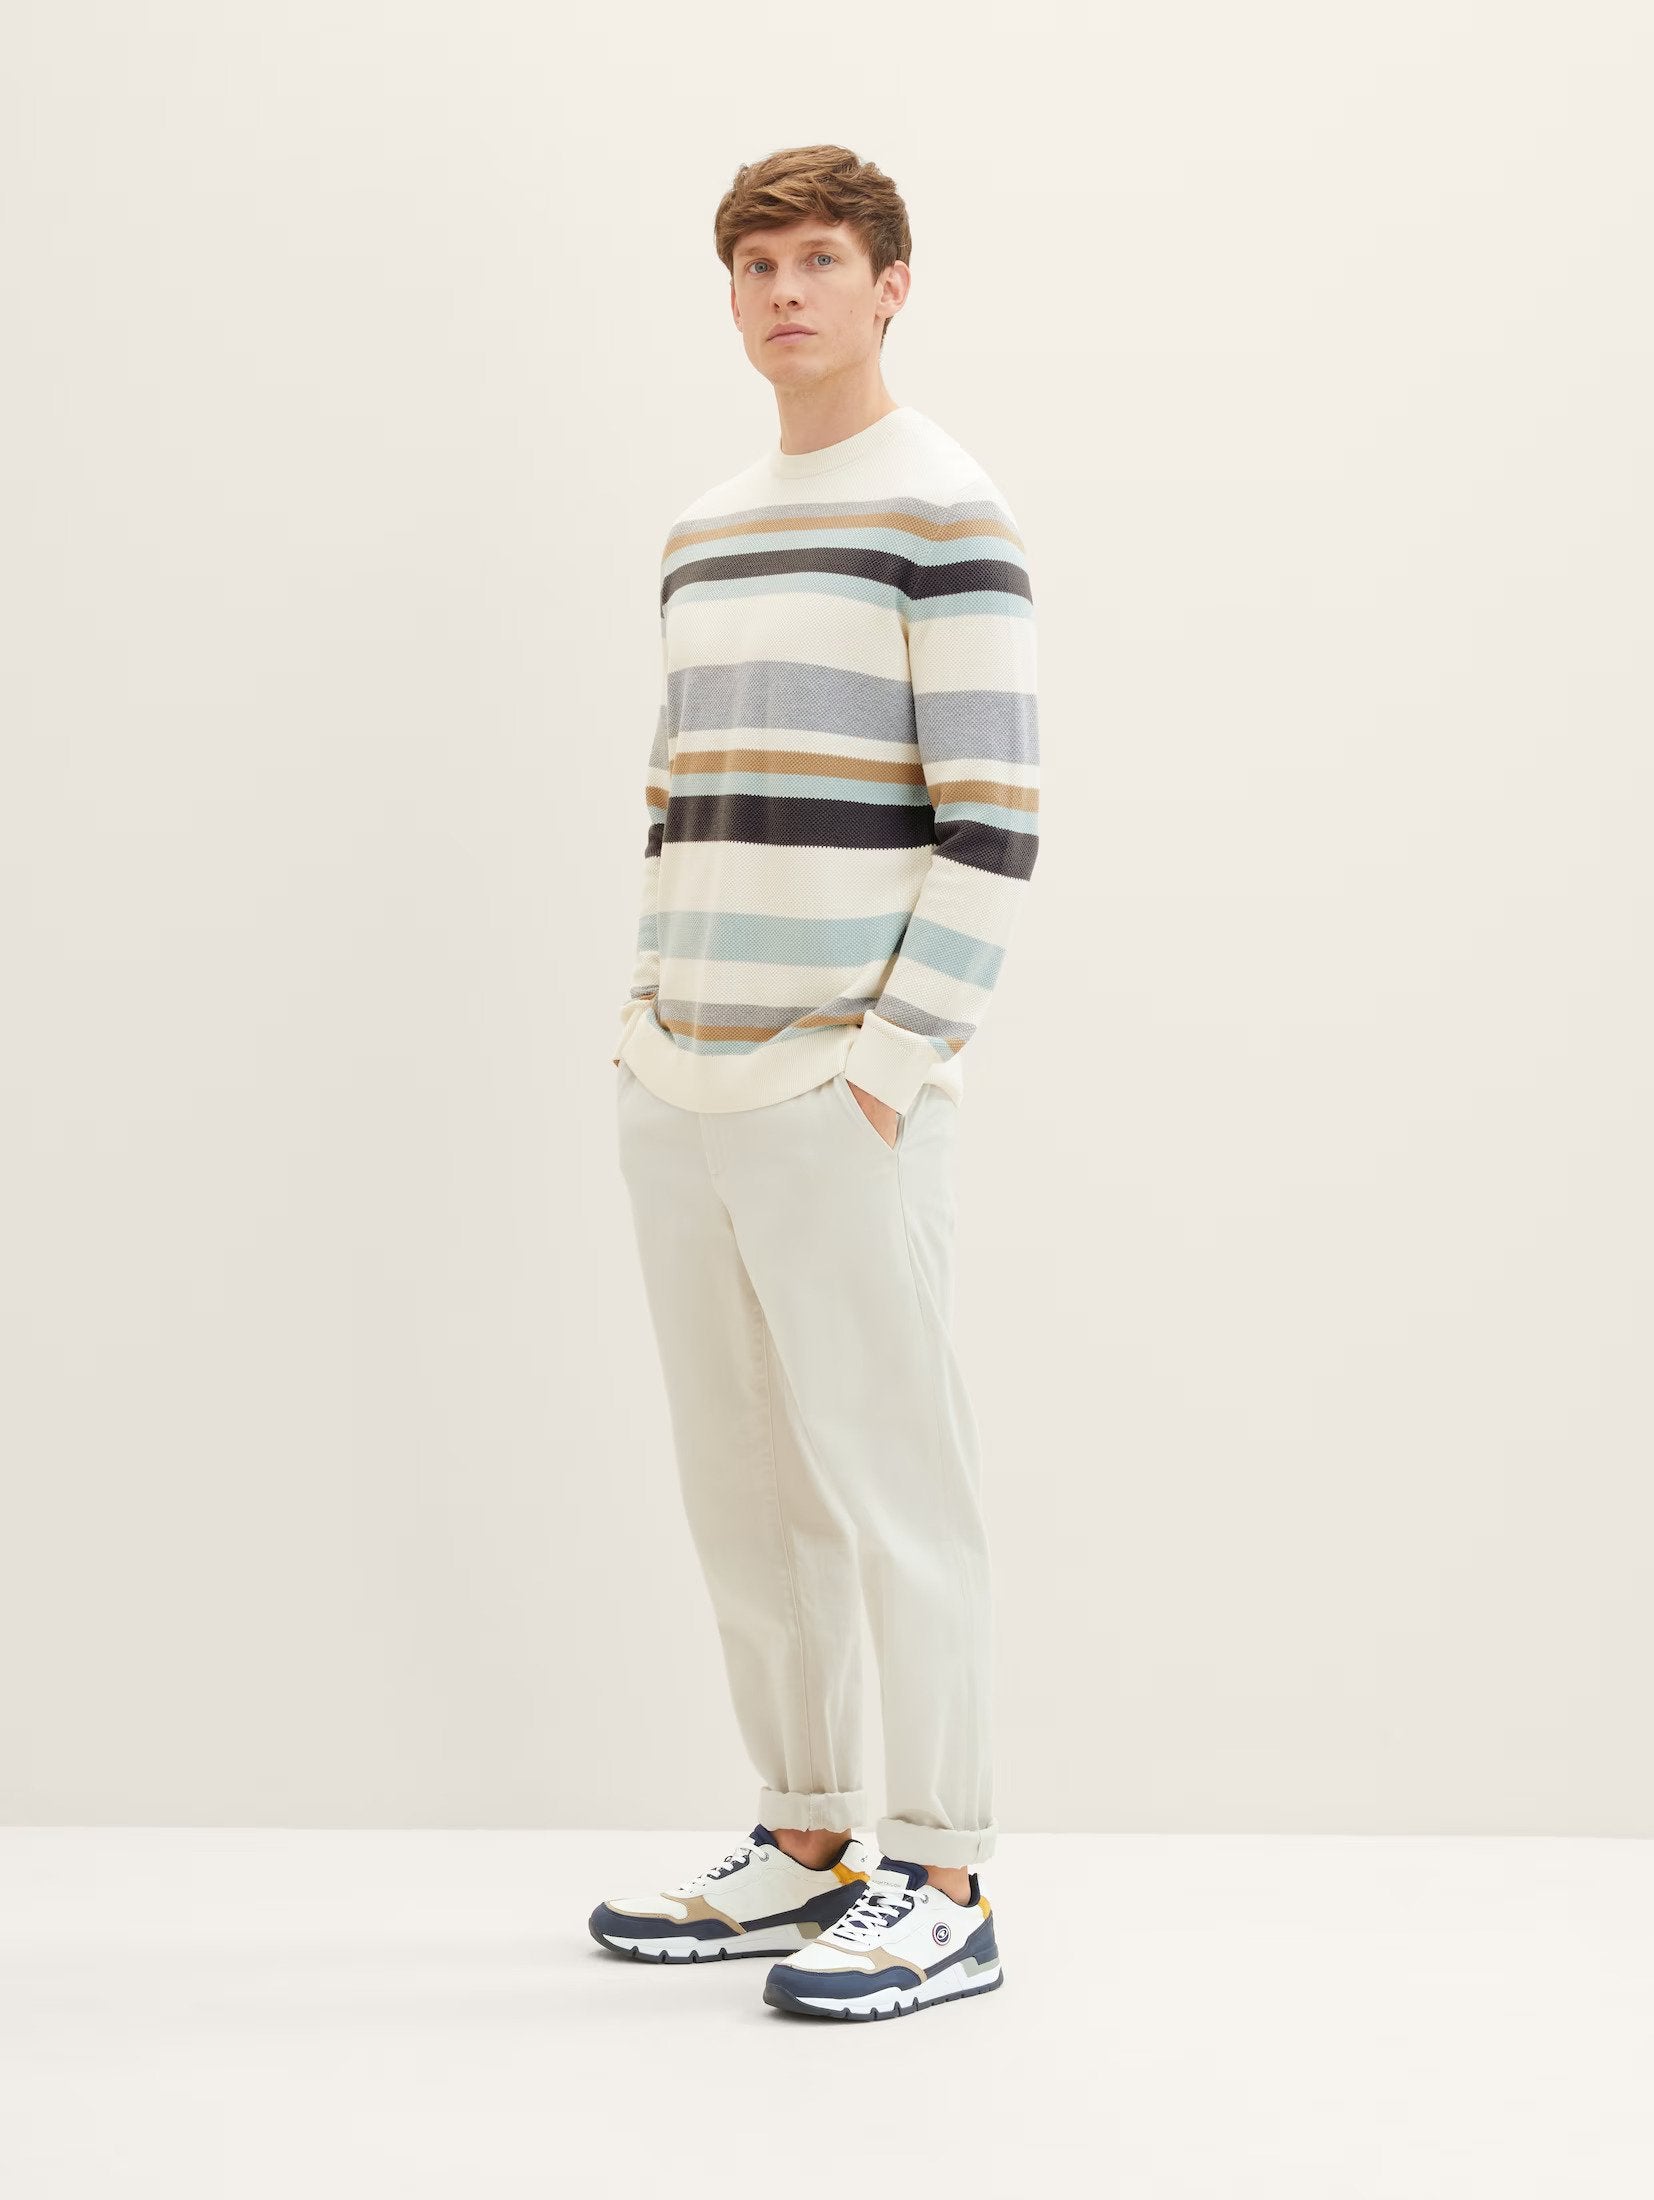 Tom Tailor White Stripped Knitted Sweater